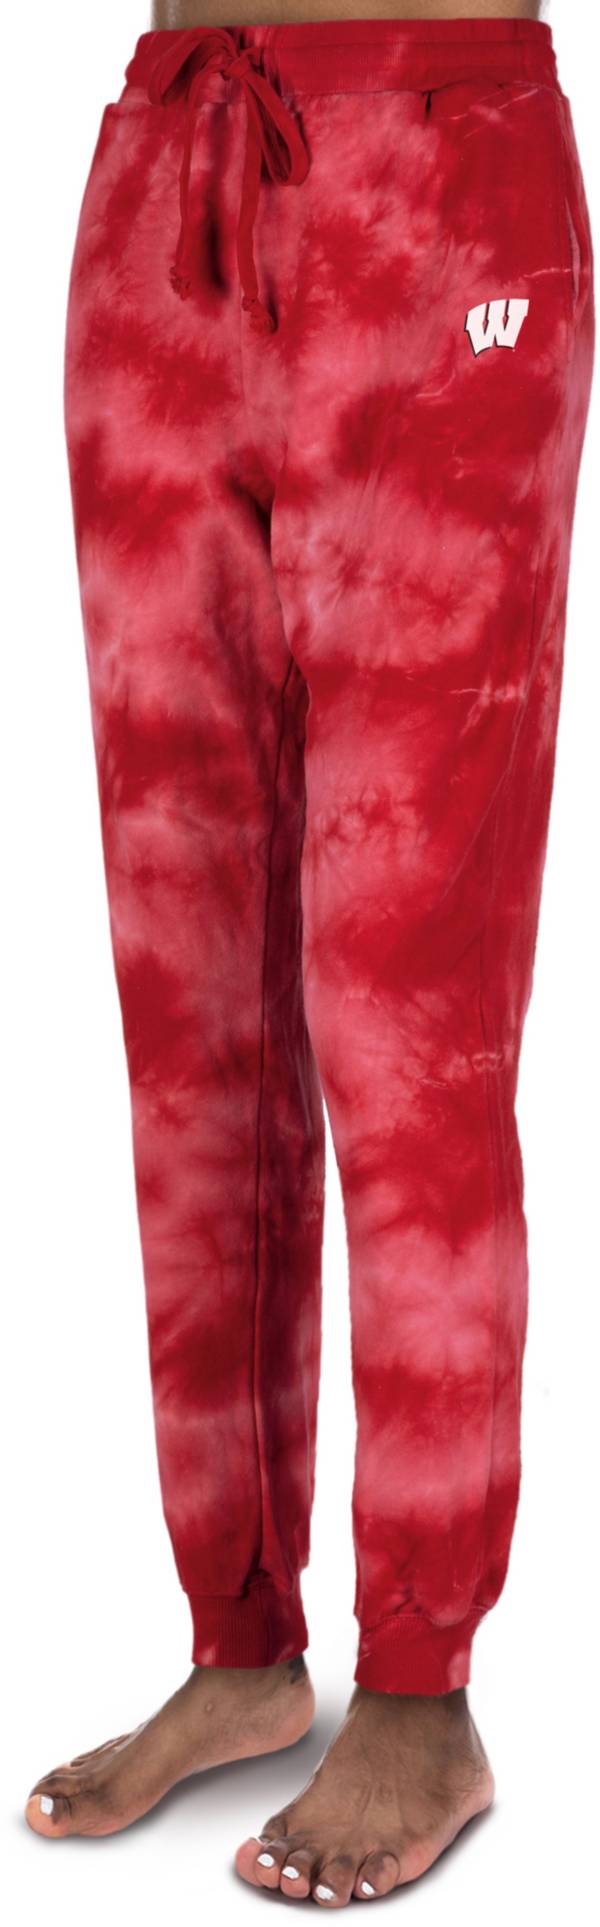 ZooZatZ Women's Wisconsin Badgers Red Tie-Dye High-Waisted Joggers product image